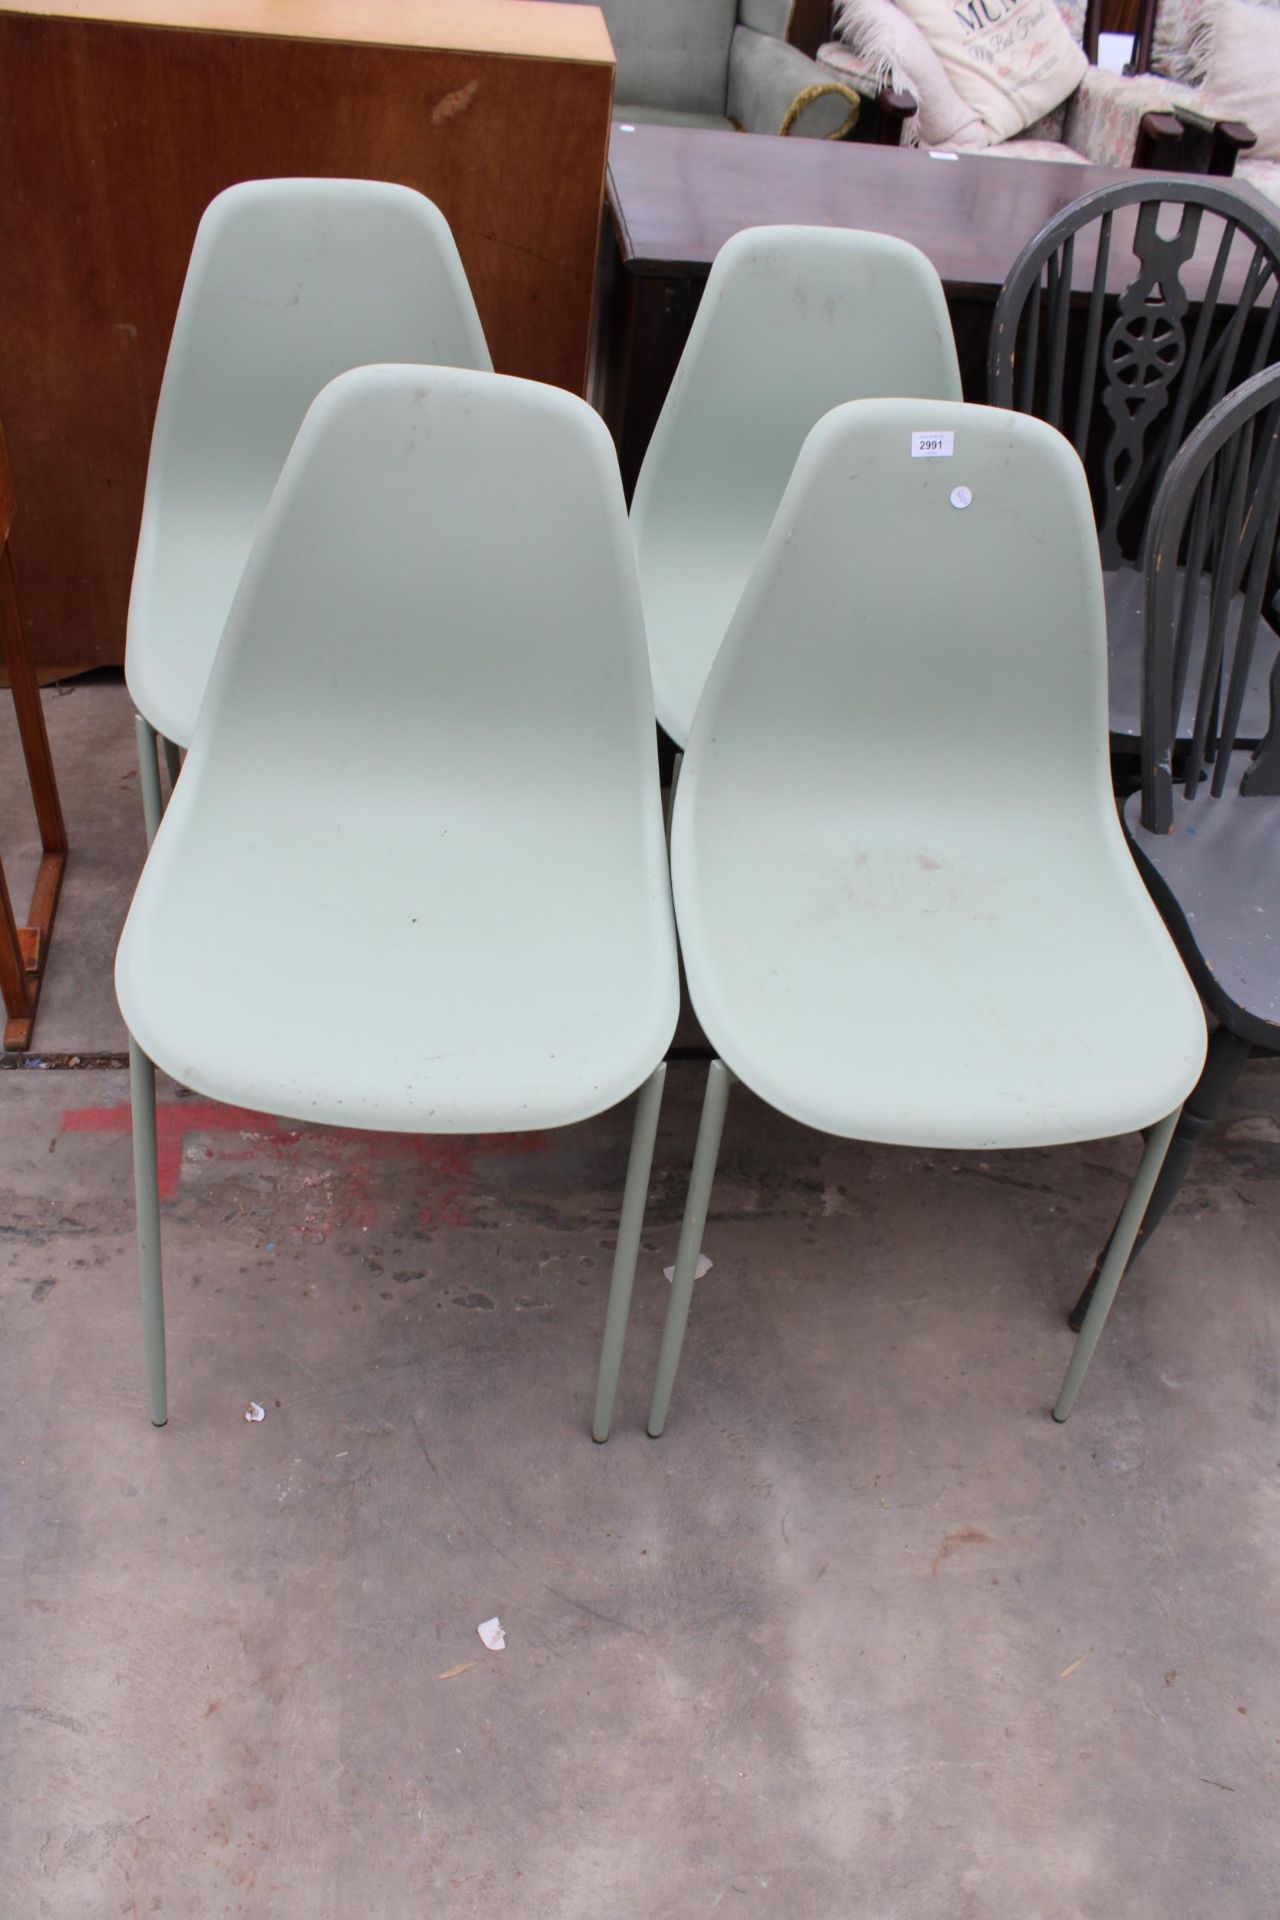 FOUR MODERN PLASTIC DINING CHAIRS